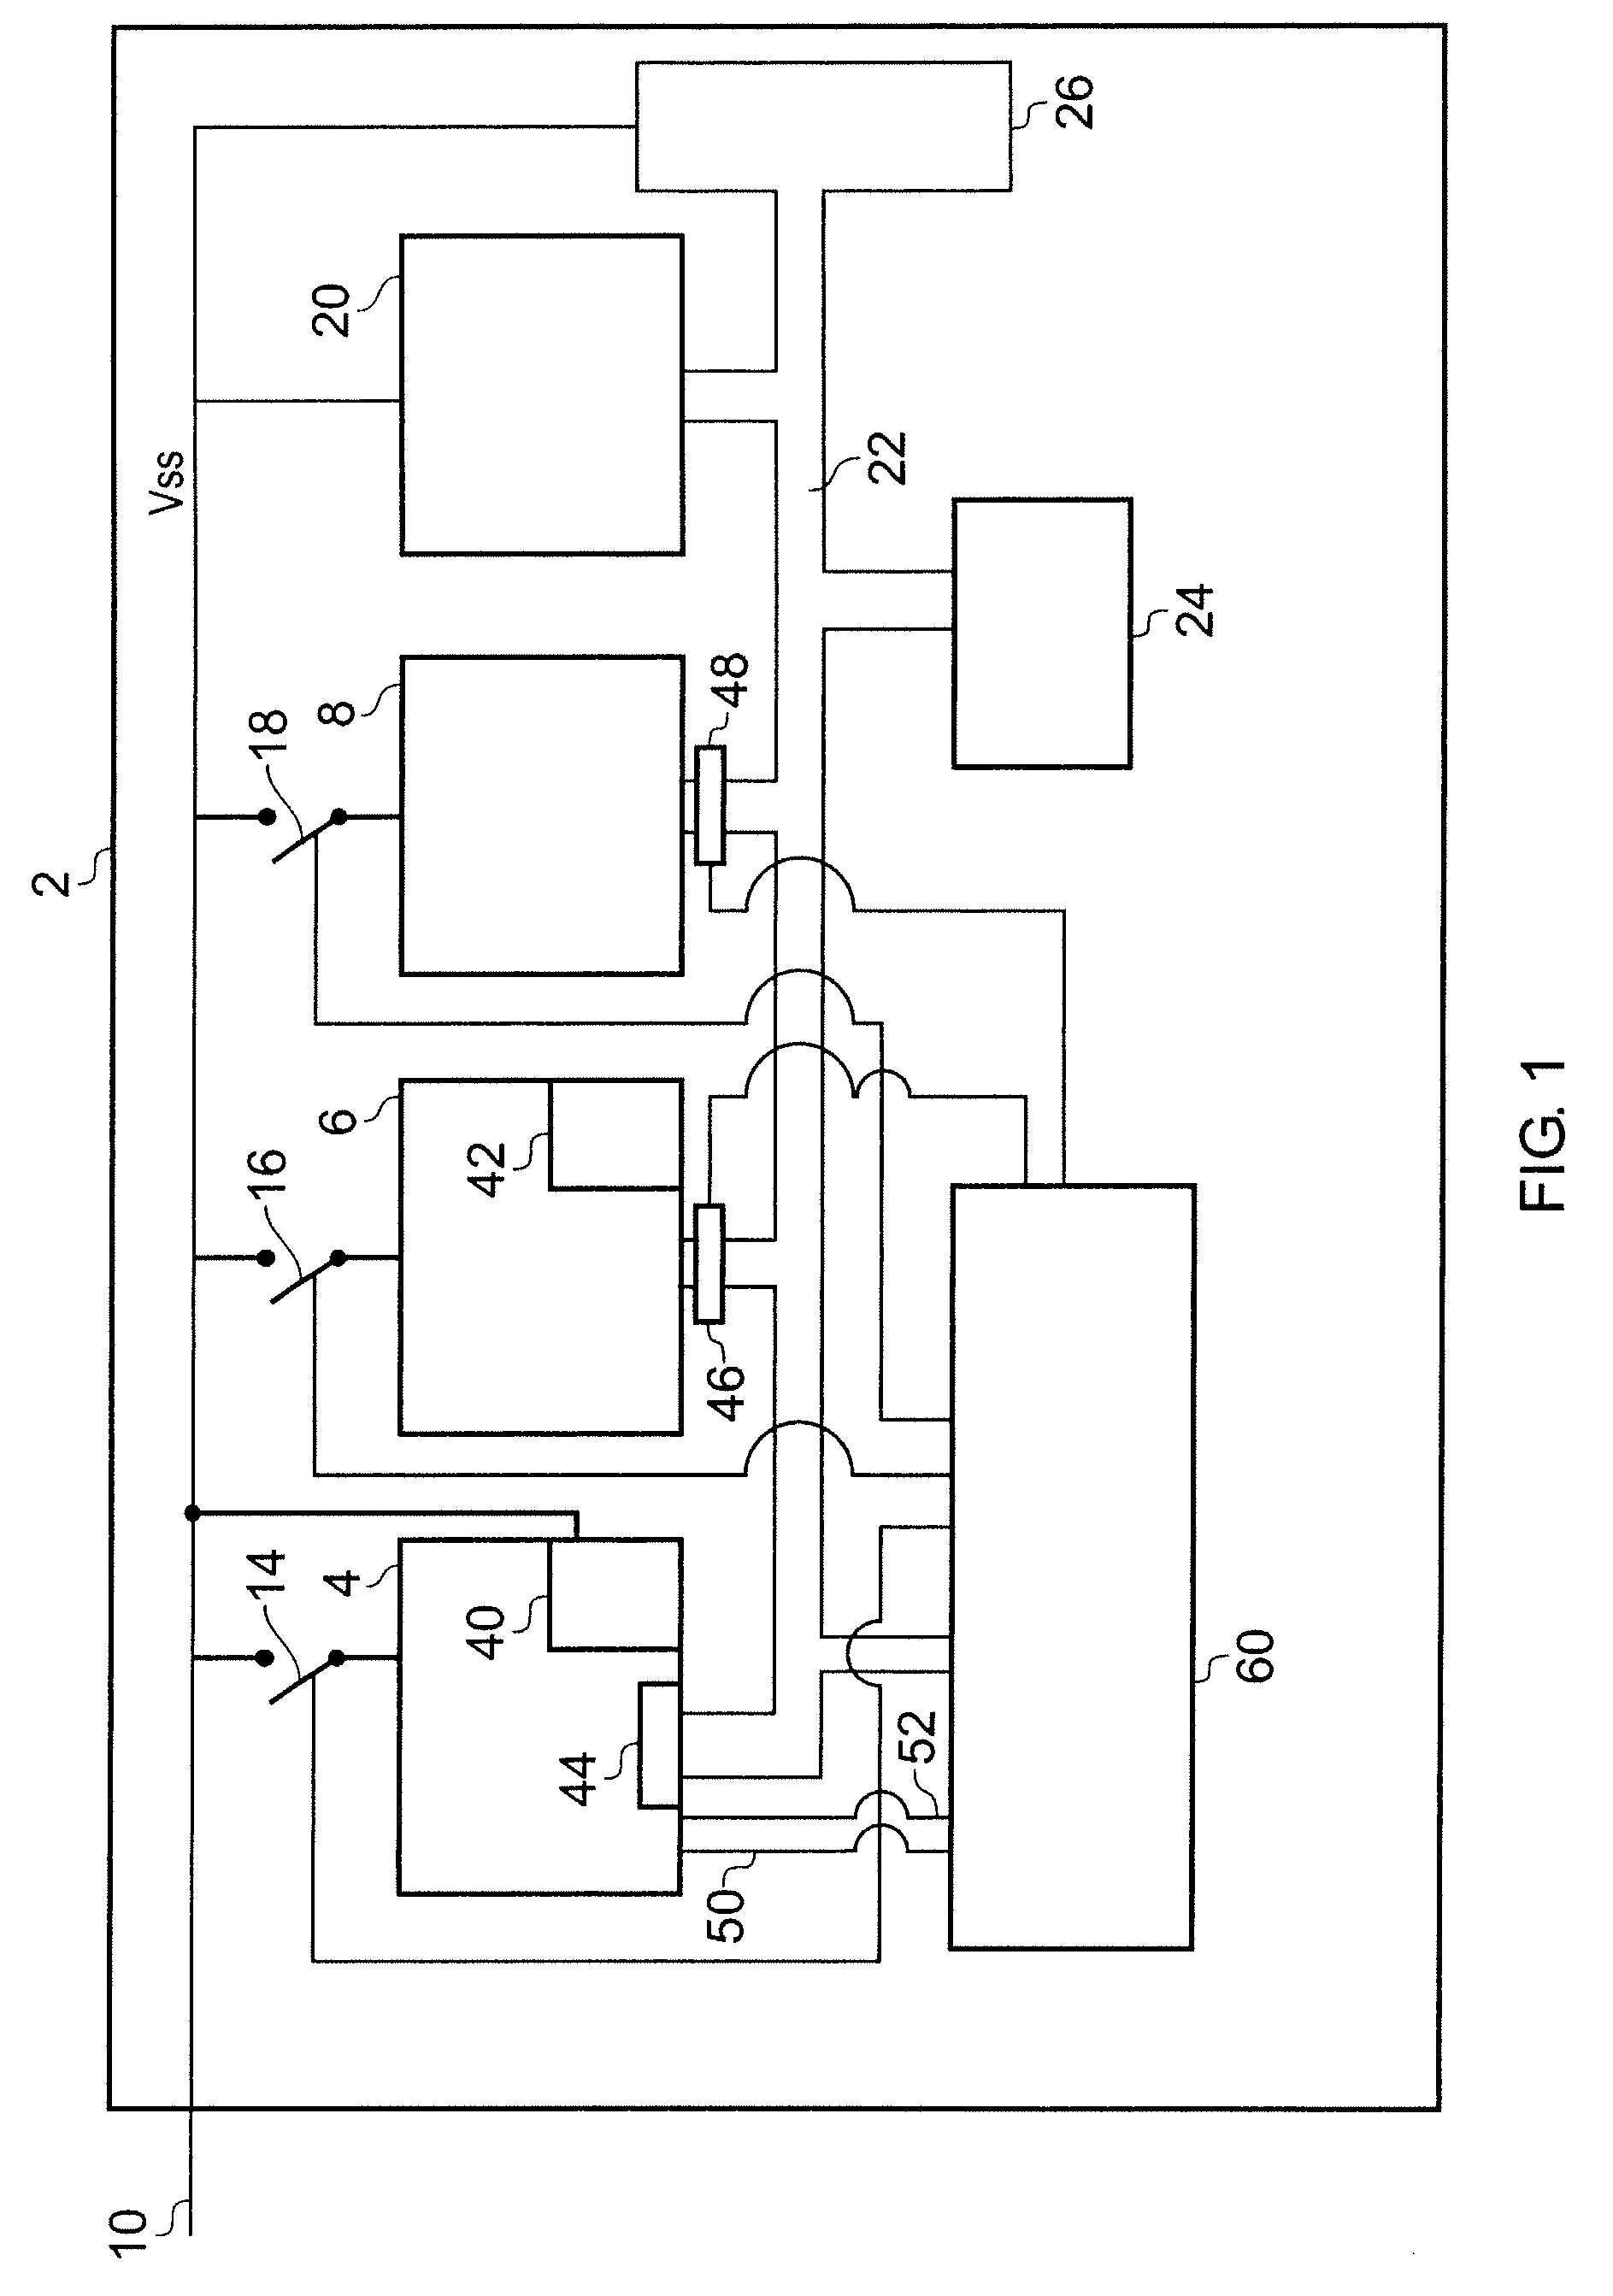 Method of and Apparatus for Reducing Power Consumption within an Integrated Circuit